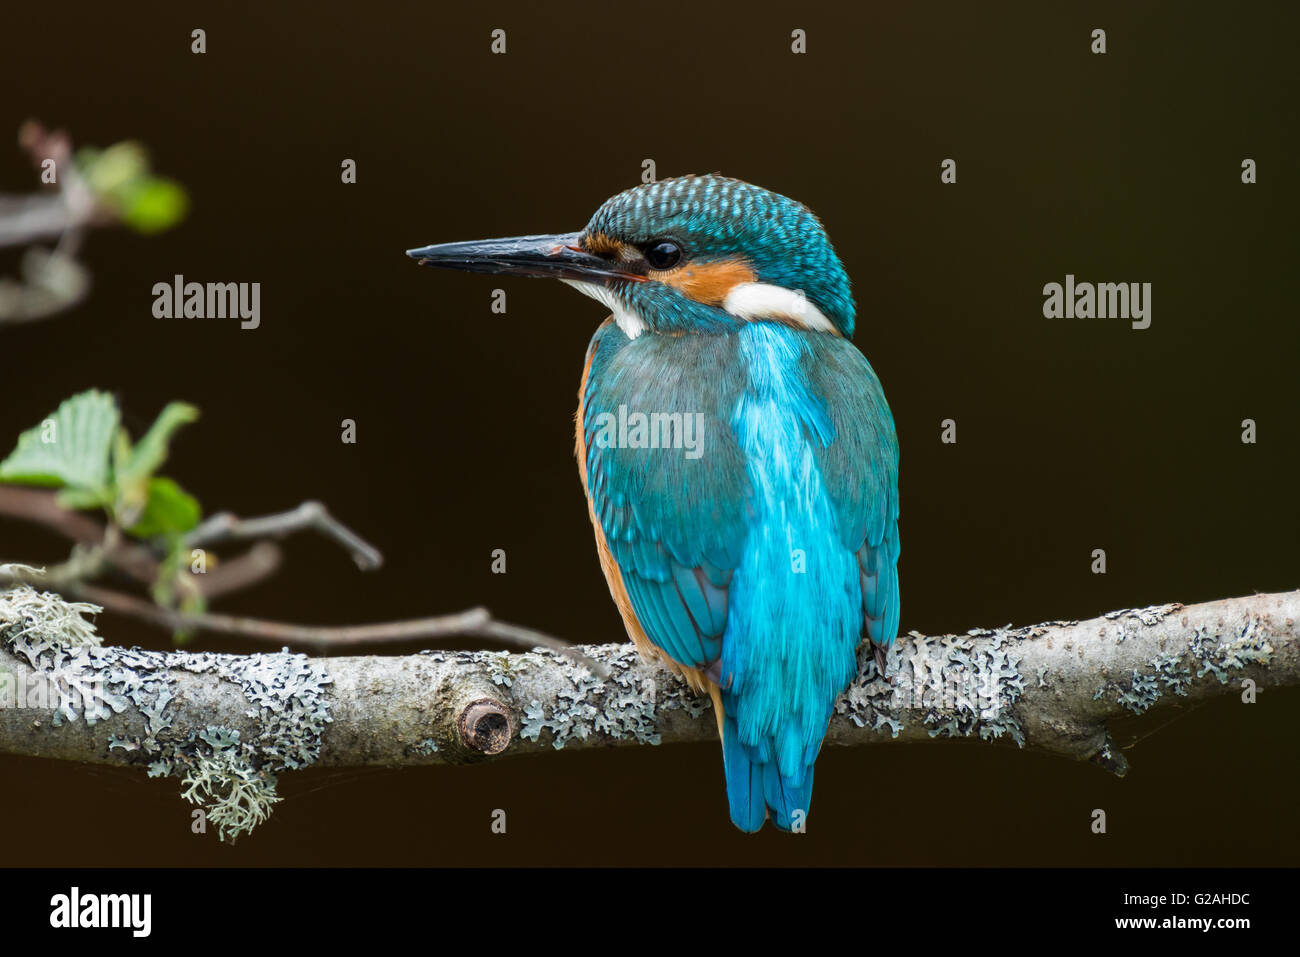 Common European Kingfisher perched on a branch. Stock Photo